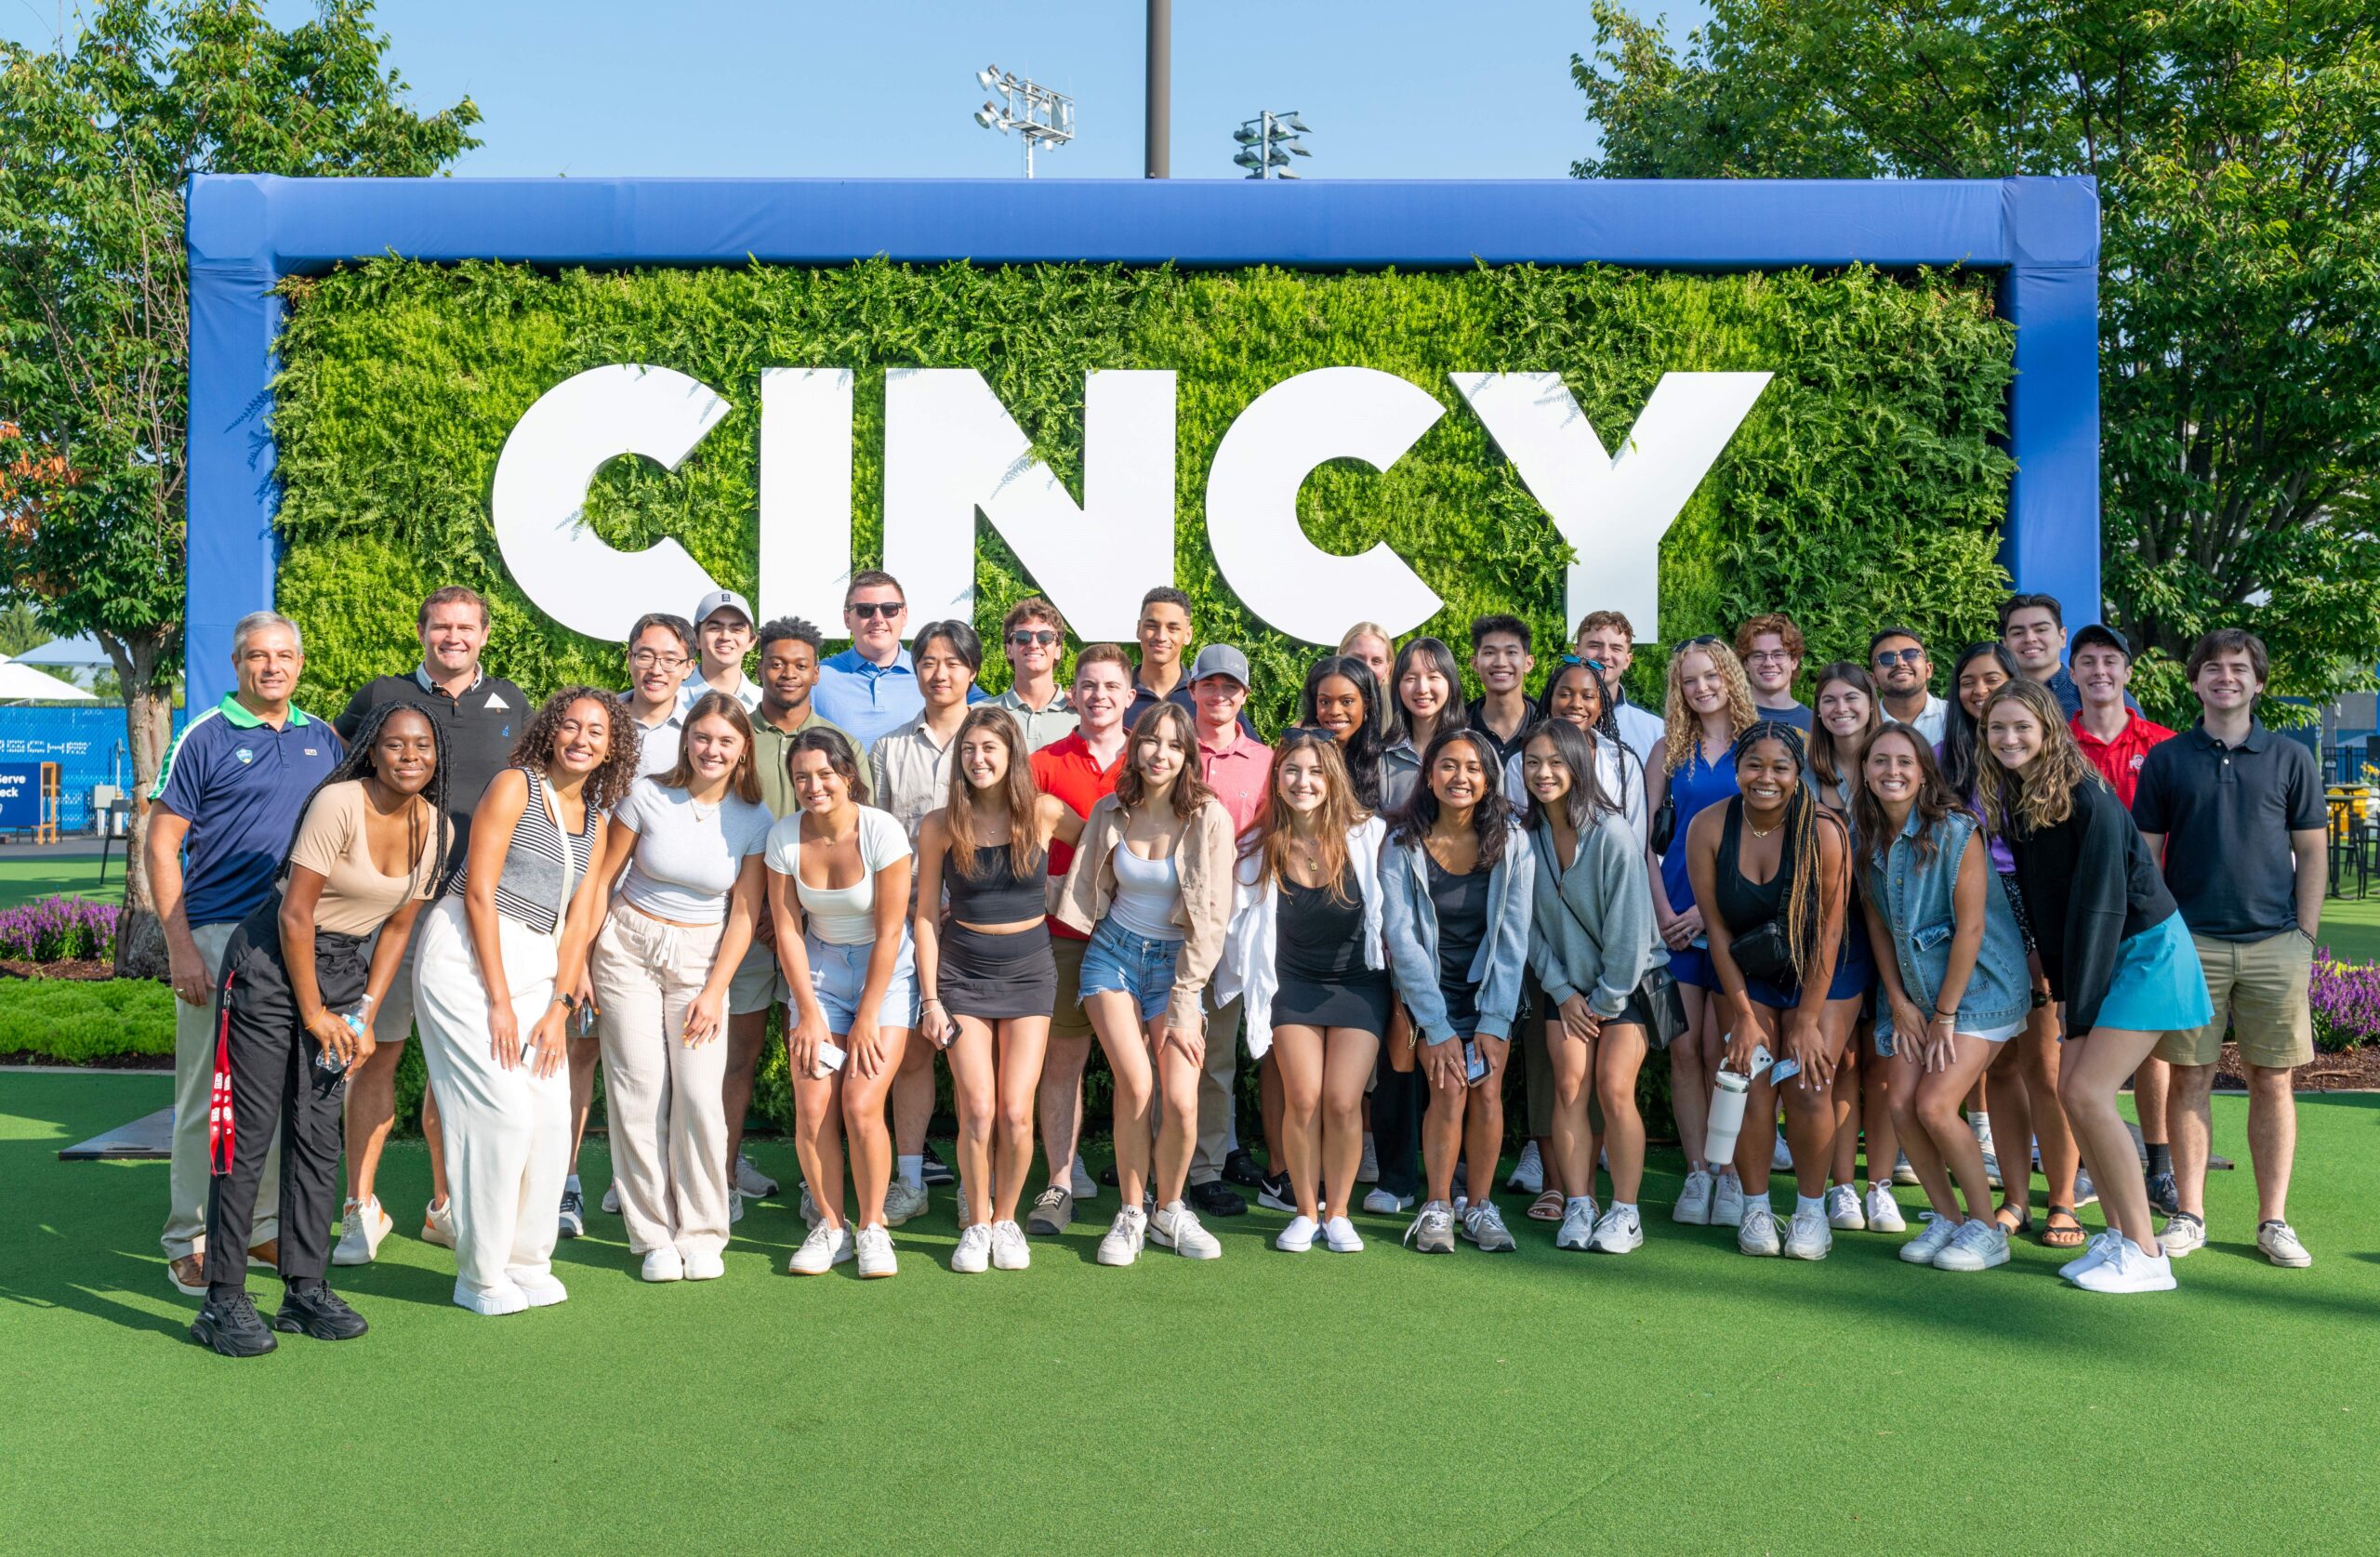 A group of people standing in front of a "Cincy" sign